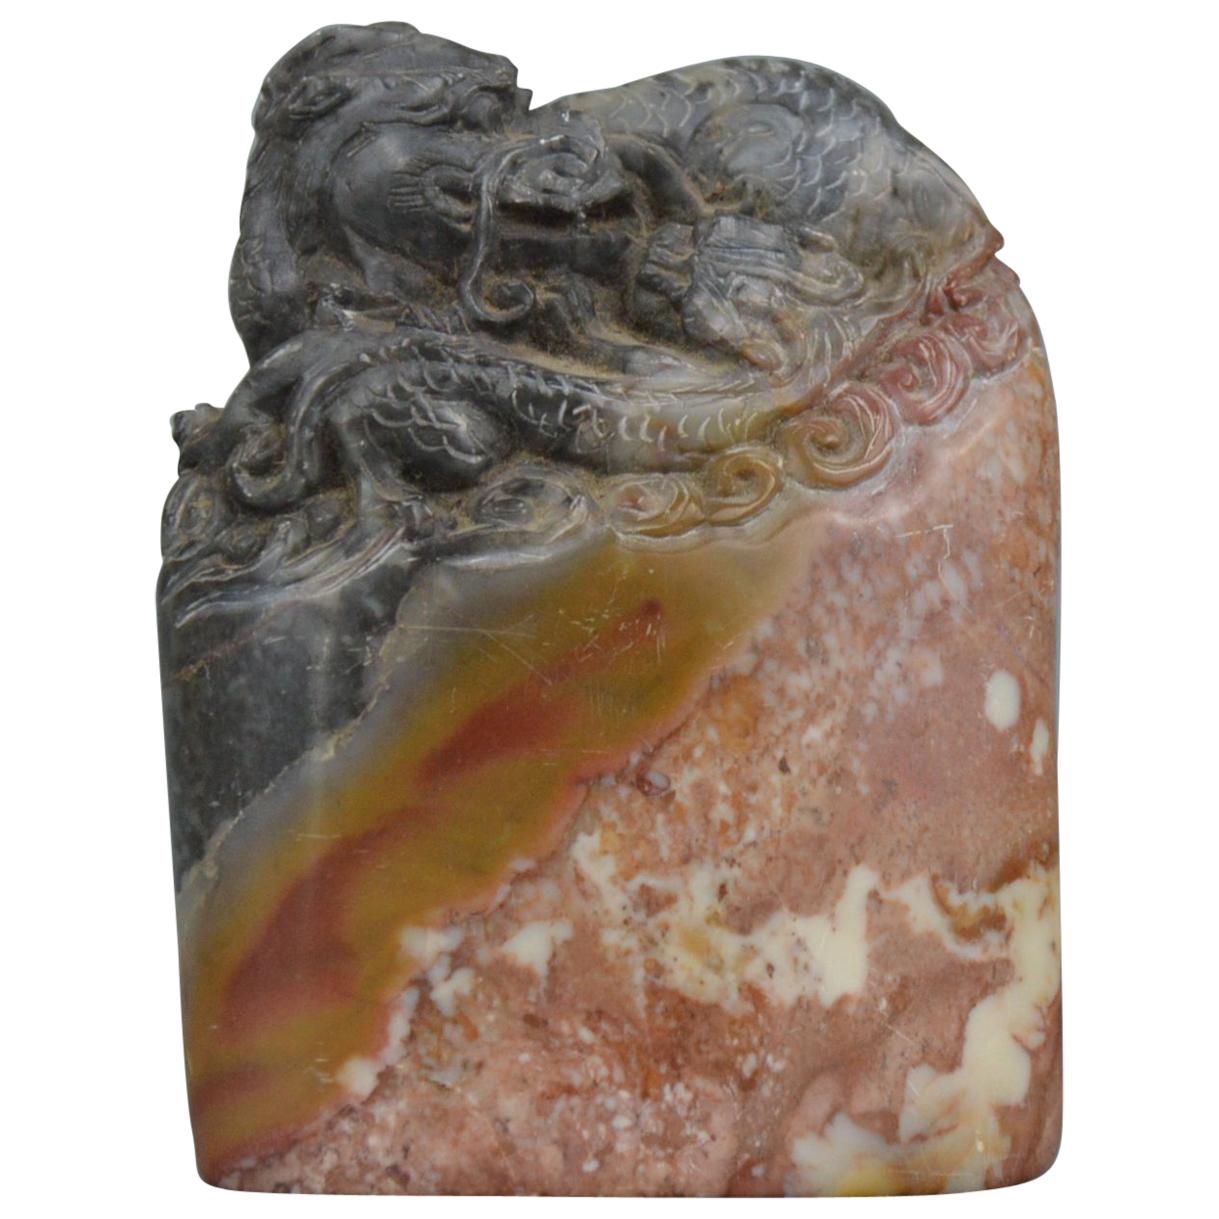 Miniature Chinese Stone Sculpture Representing a Dragon Lying on a Rock im Angebot